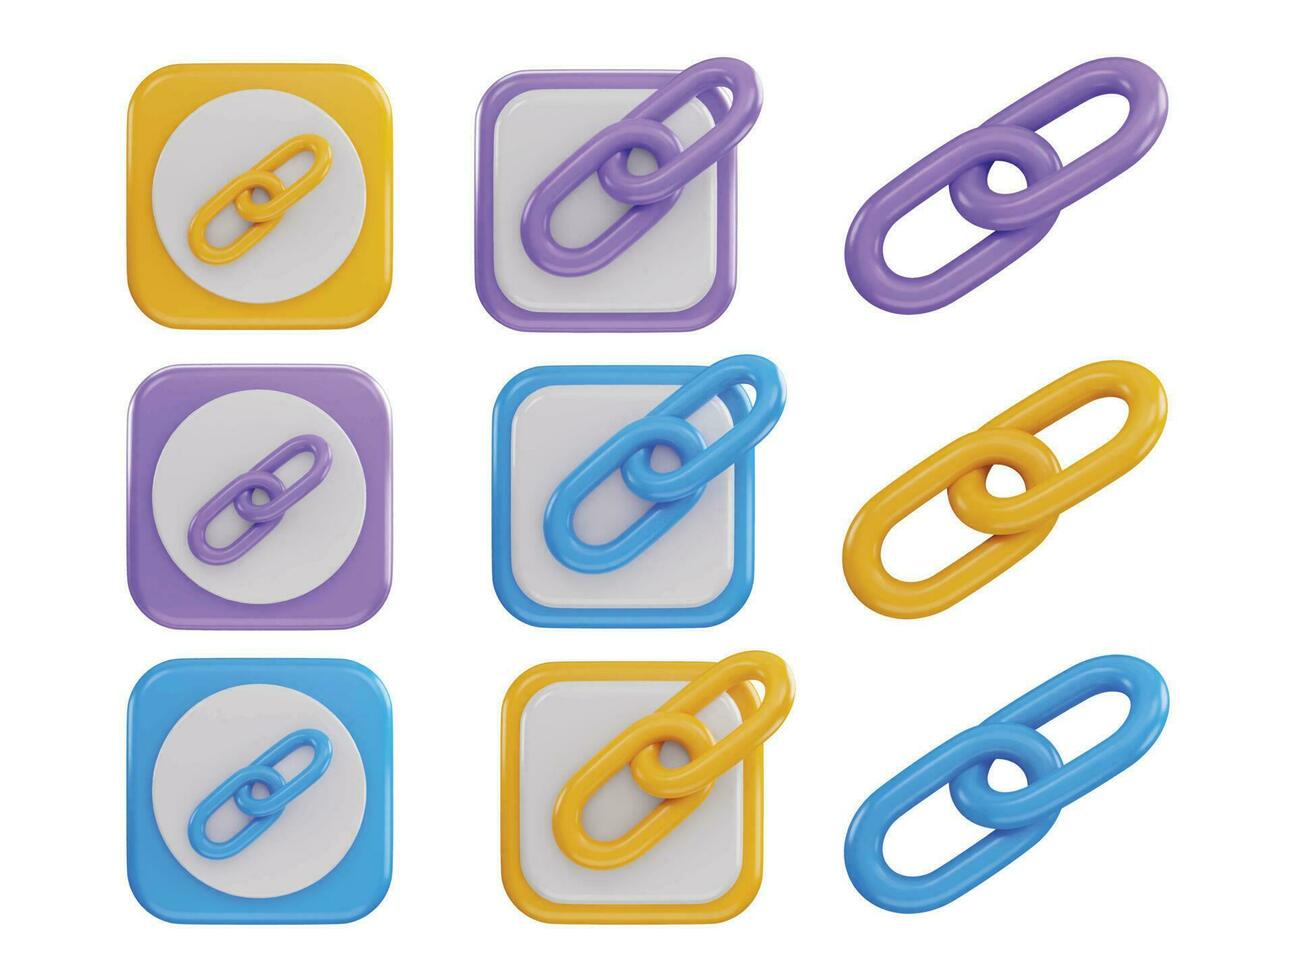 link chain icon 3d rendering vector illustration set